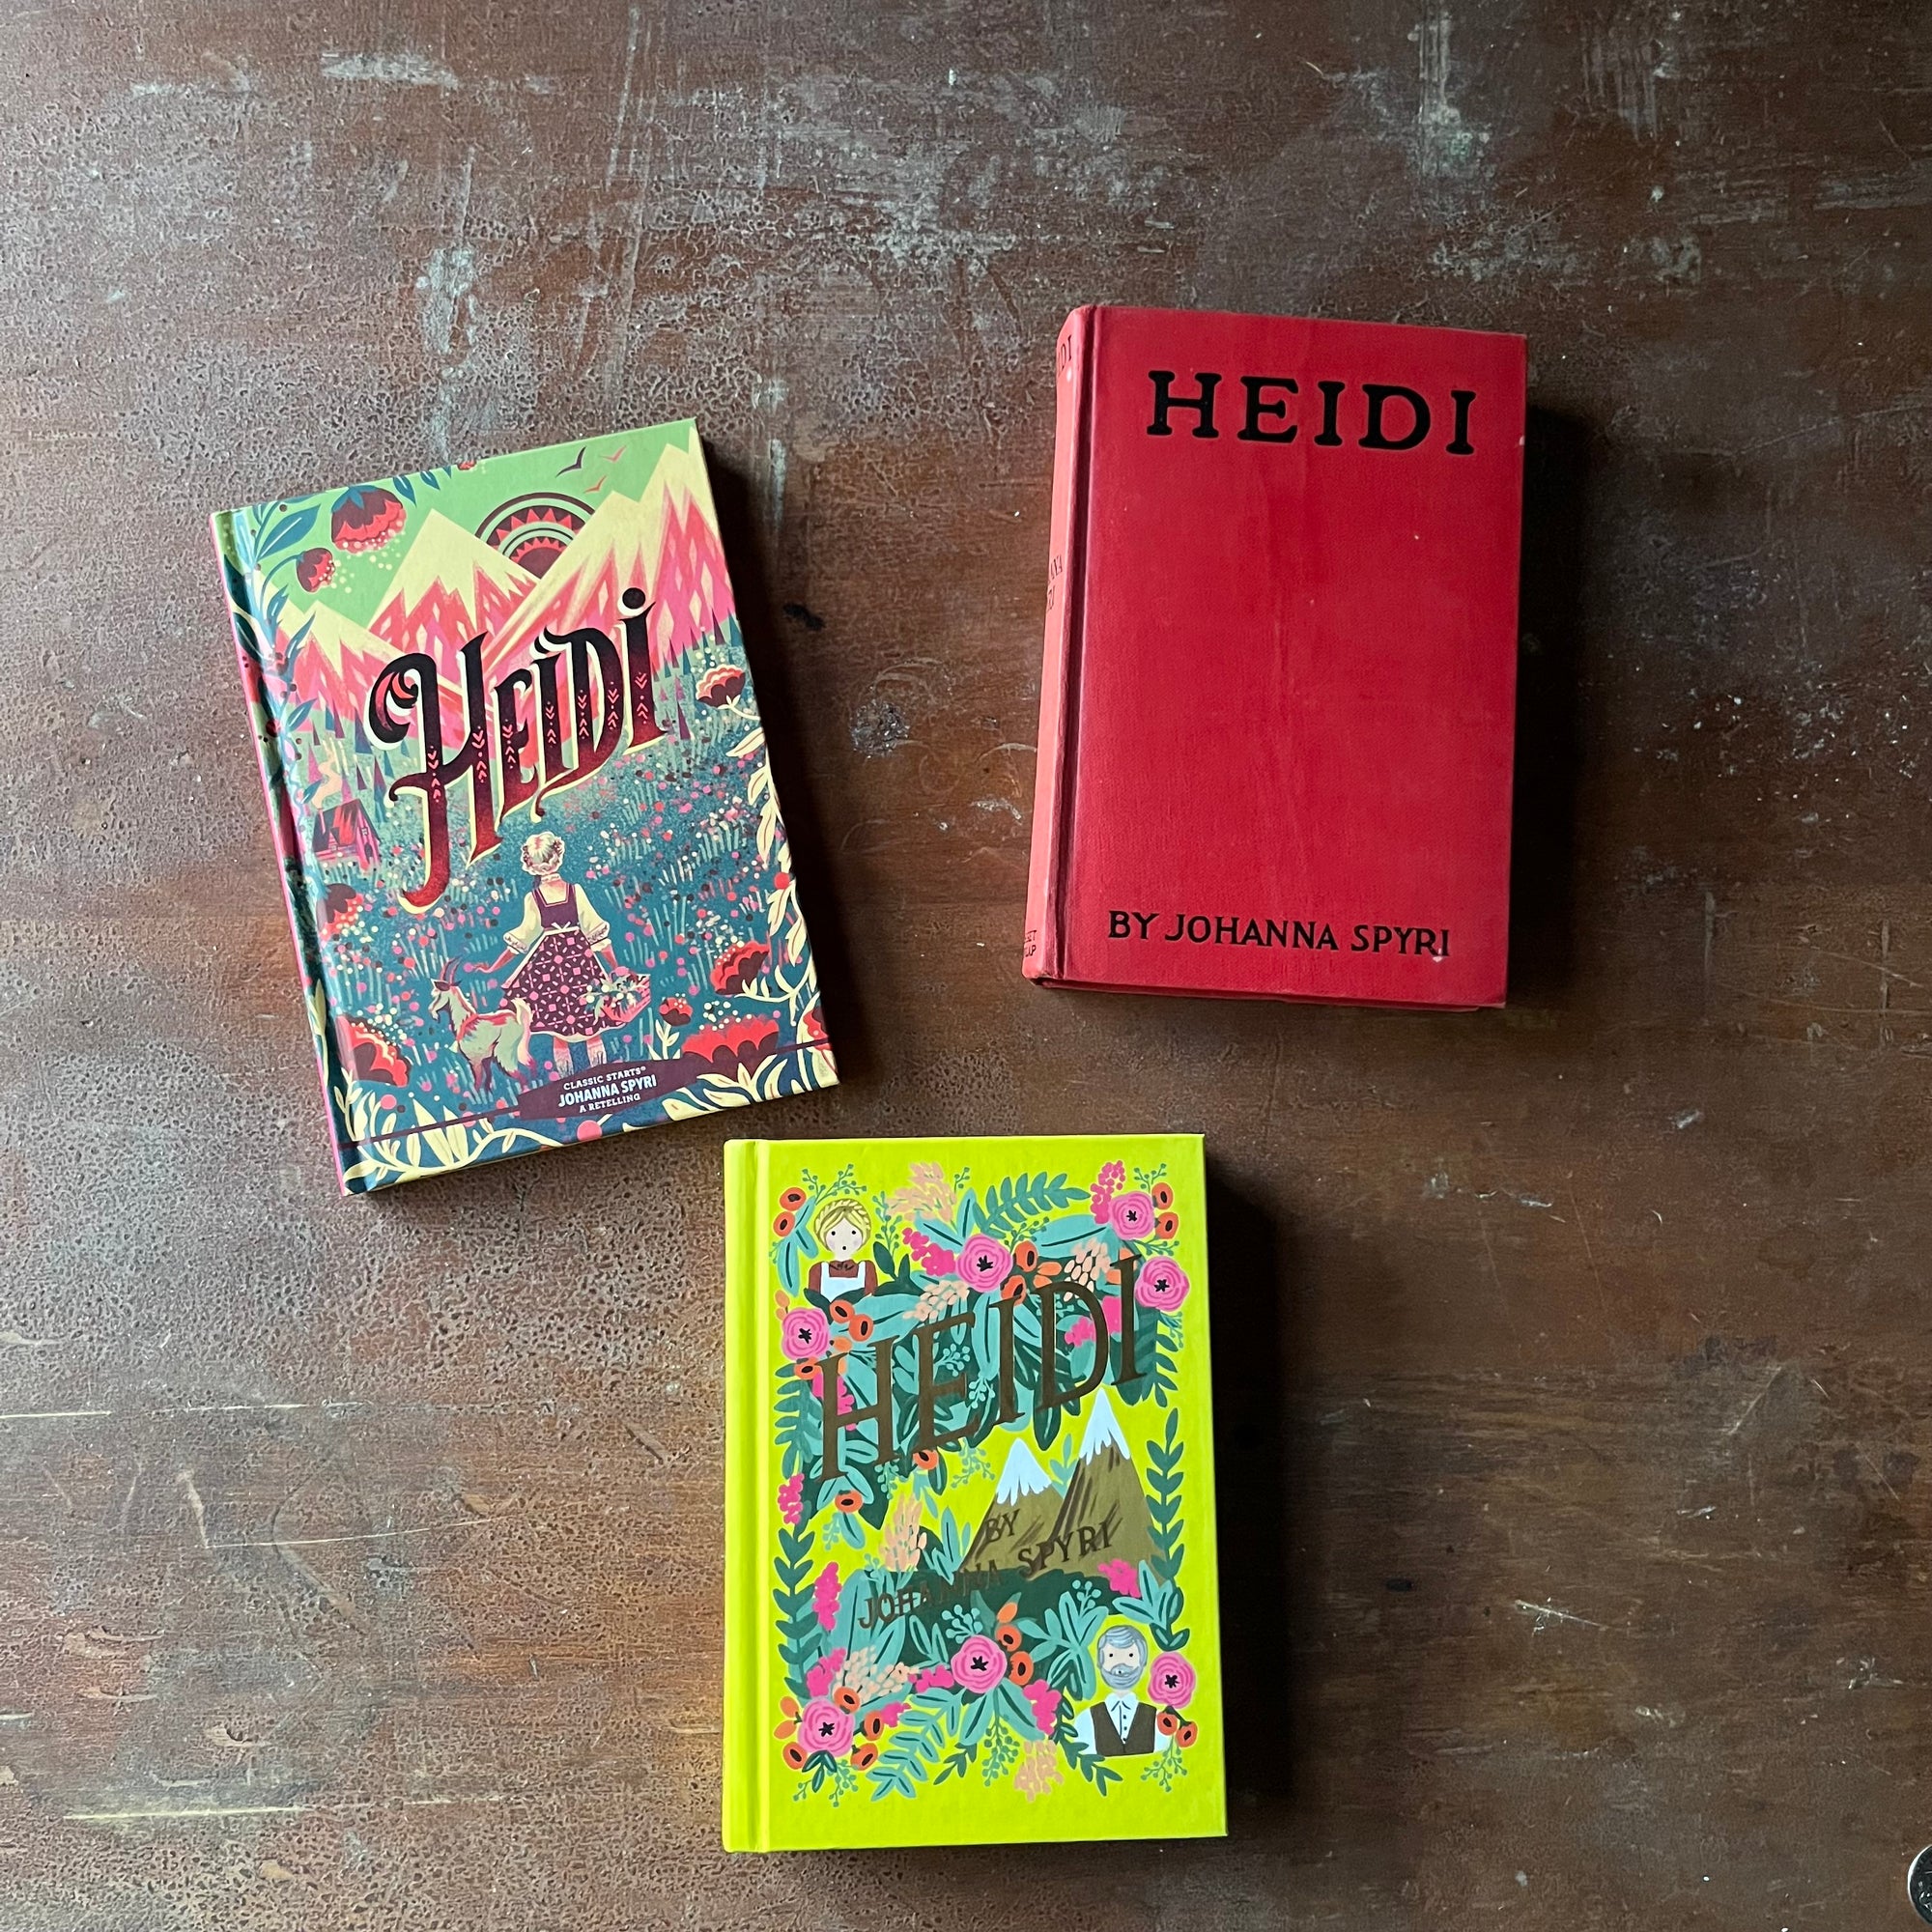 Trio of Heidi Hardcover Editions by Johanna Spyri-Puffin in Bloom, Grosset & Dunlap & Union Square Kids Editions-vintage children's chapter books-view of the front covers